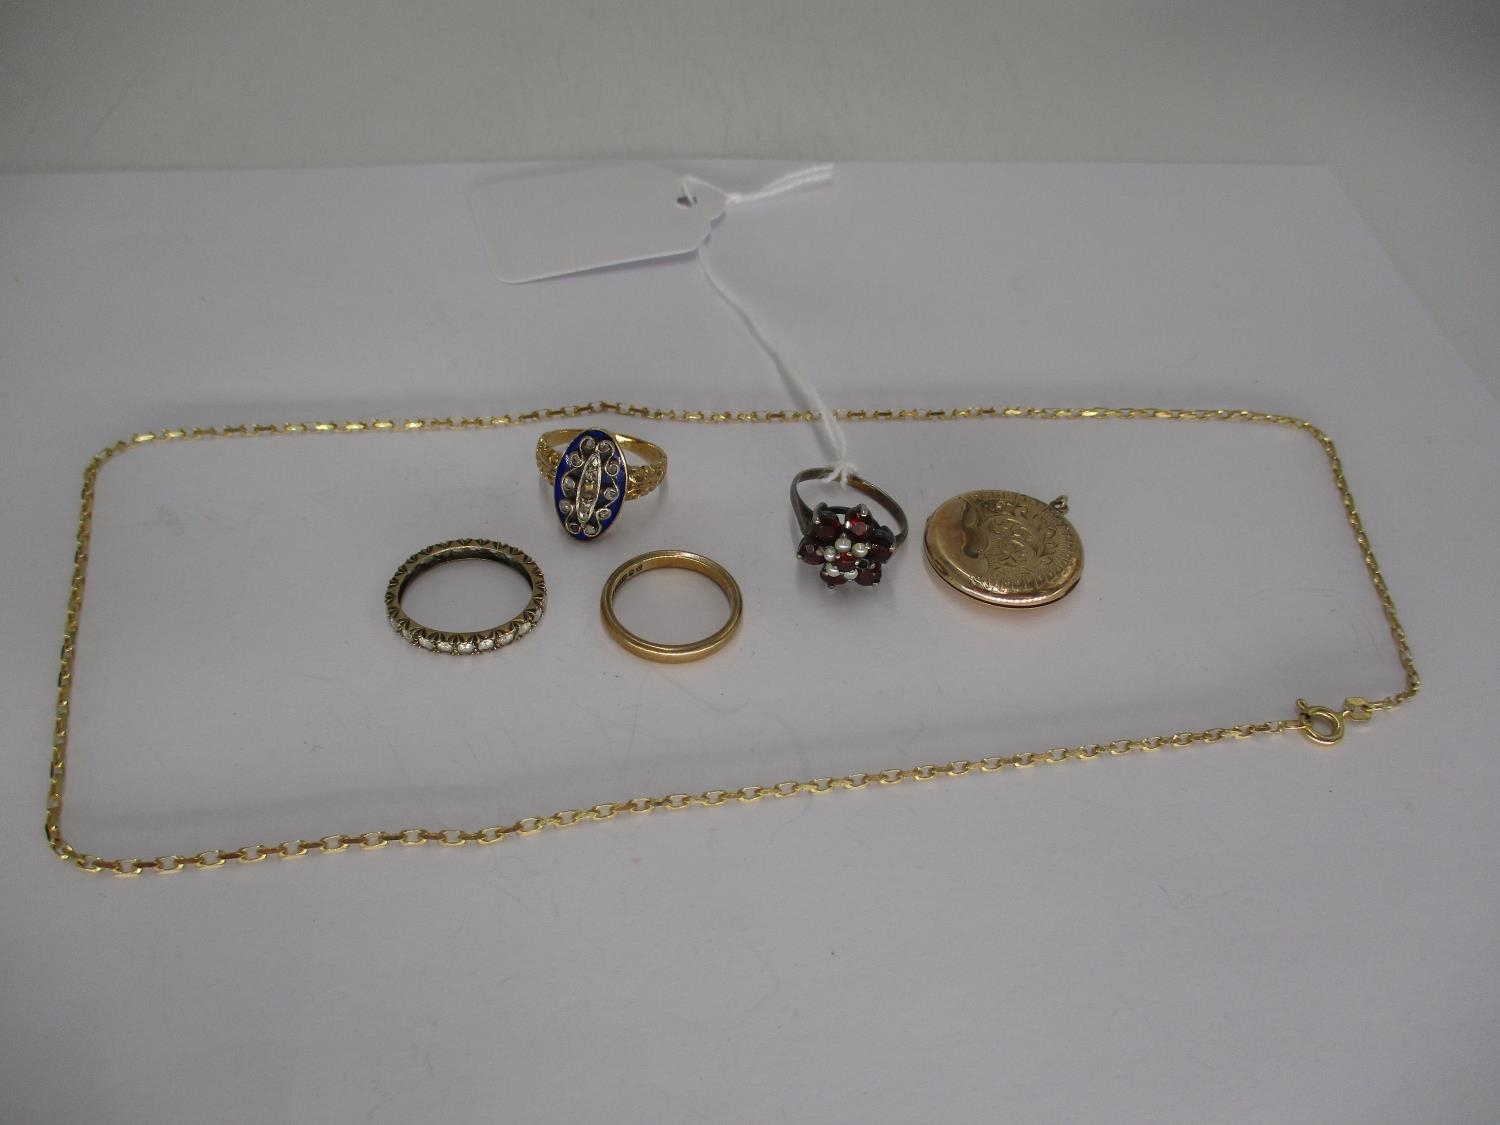 9ct Gold Necklace and Wedding Ring, 5.58g, 9ct Gold Eternity Ring, Diamond and Enamel Set Ring, Gold